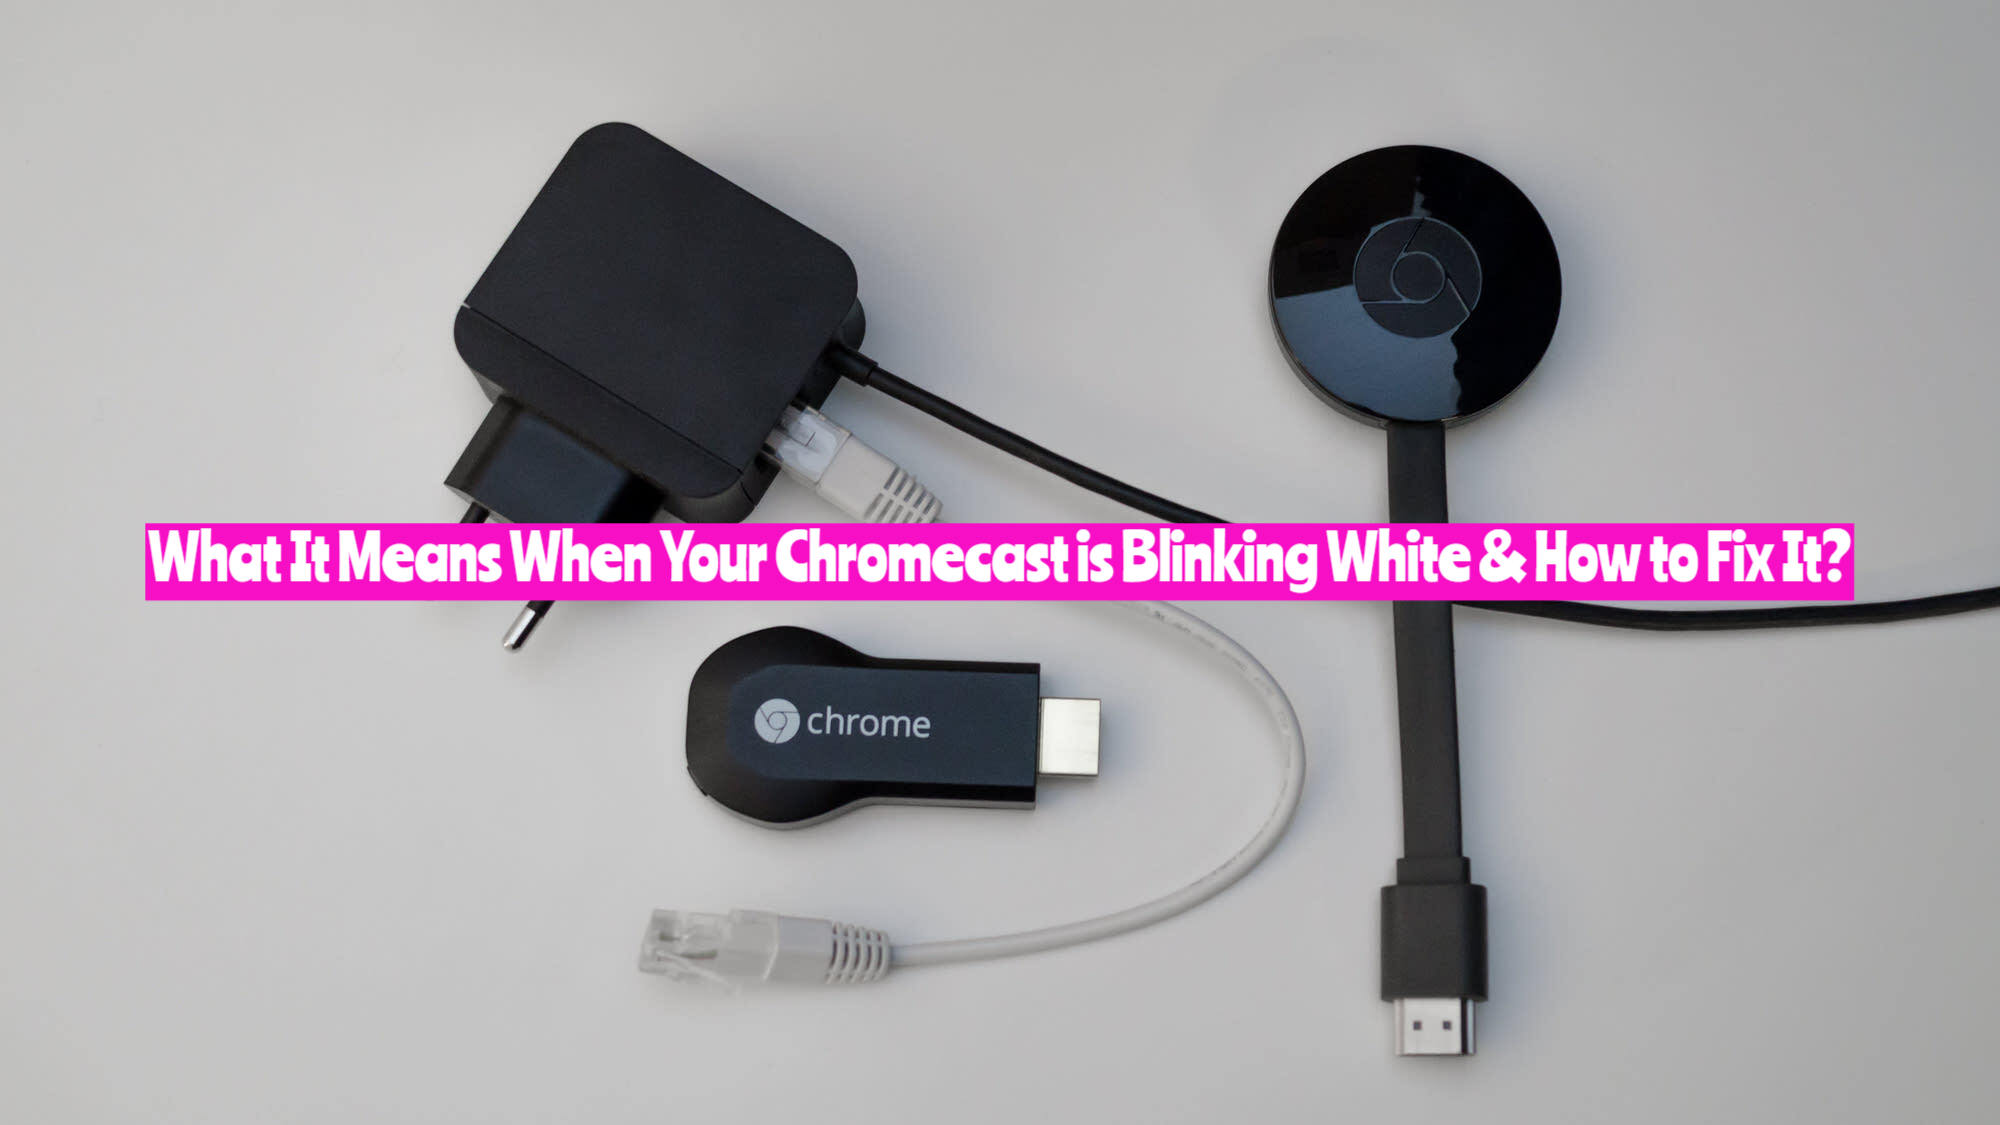 What It Means When Your Chromecast is Blinking White?